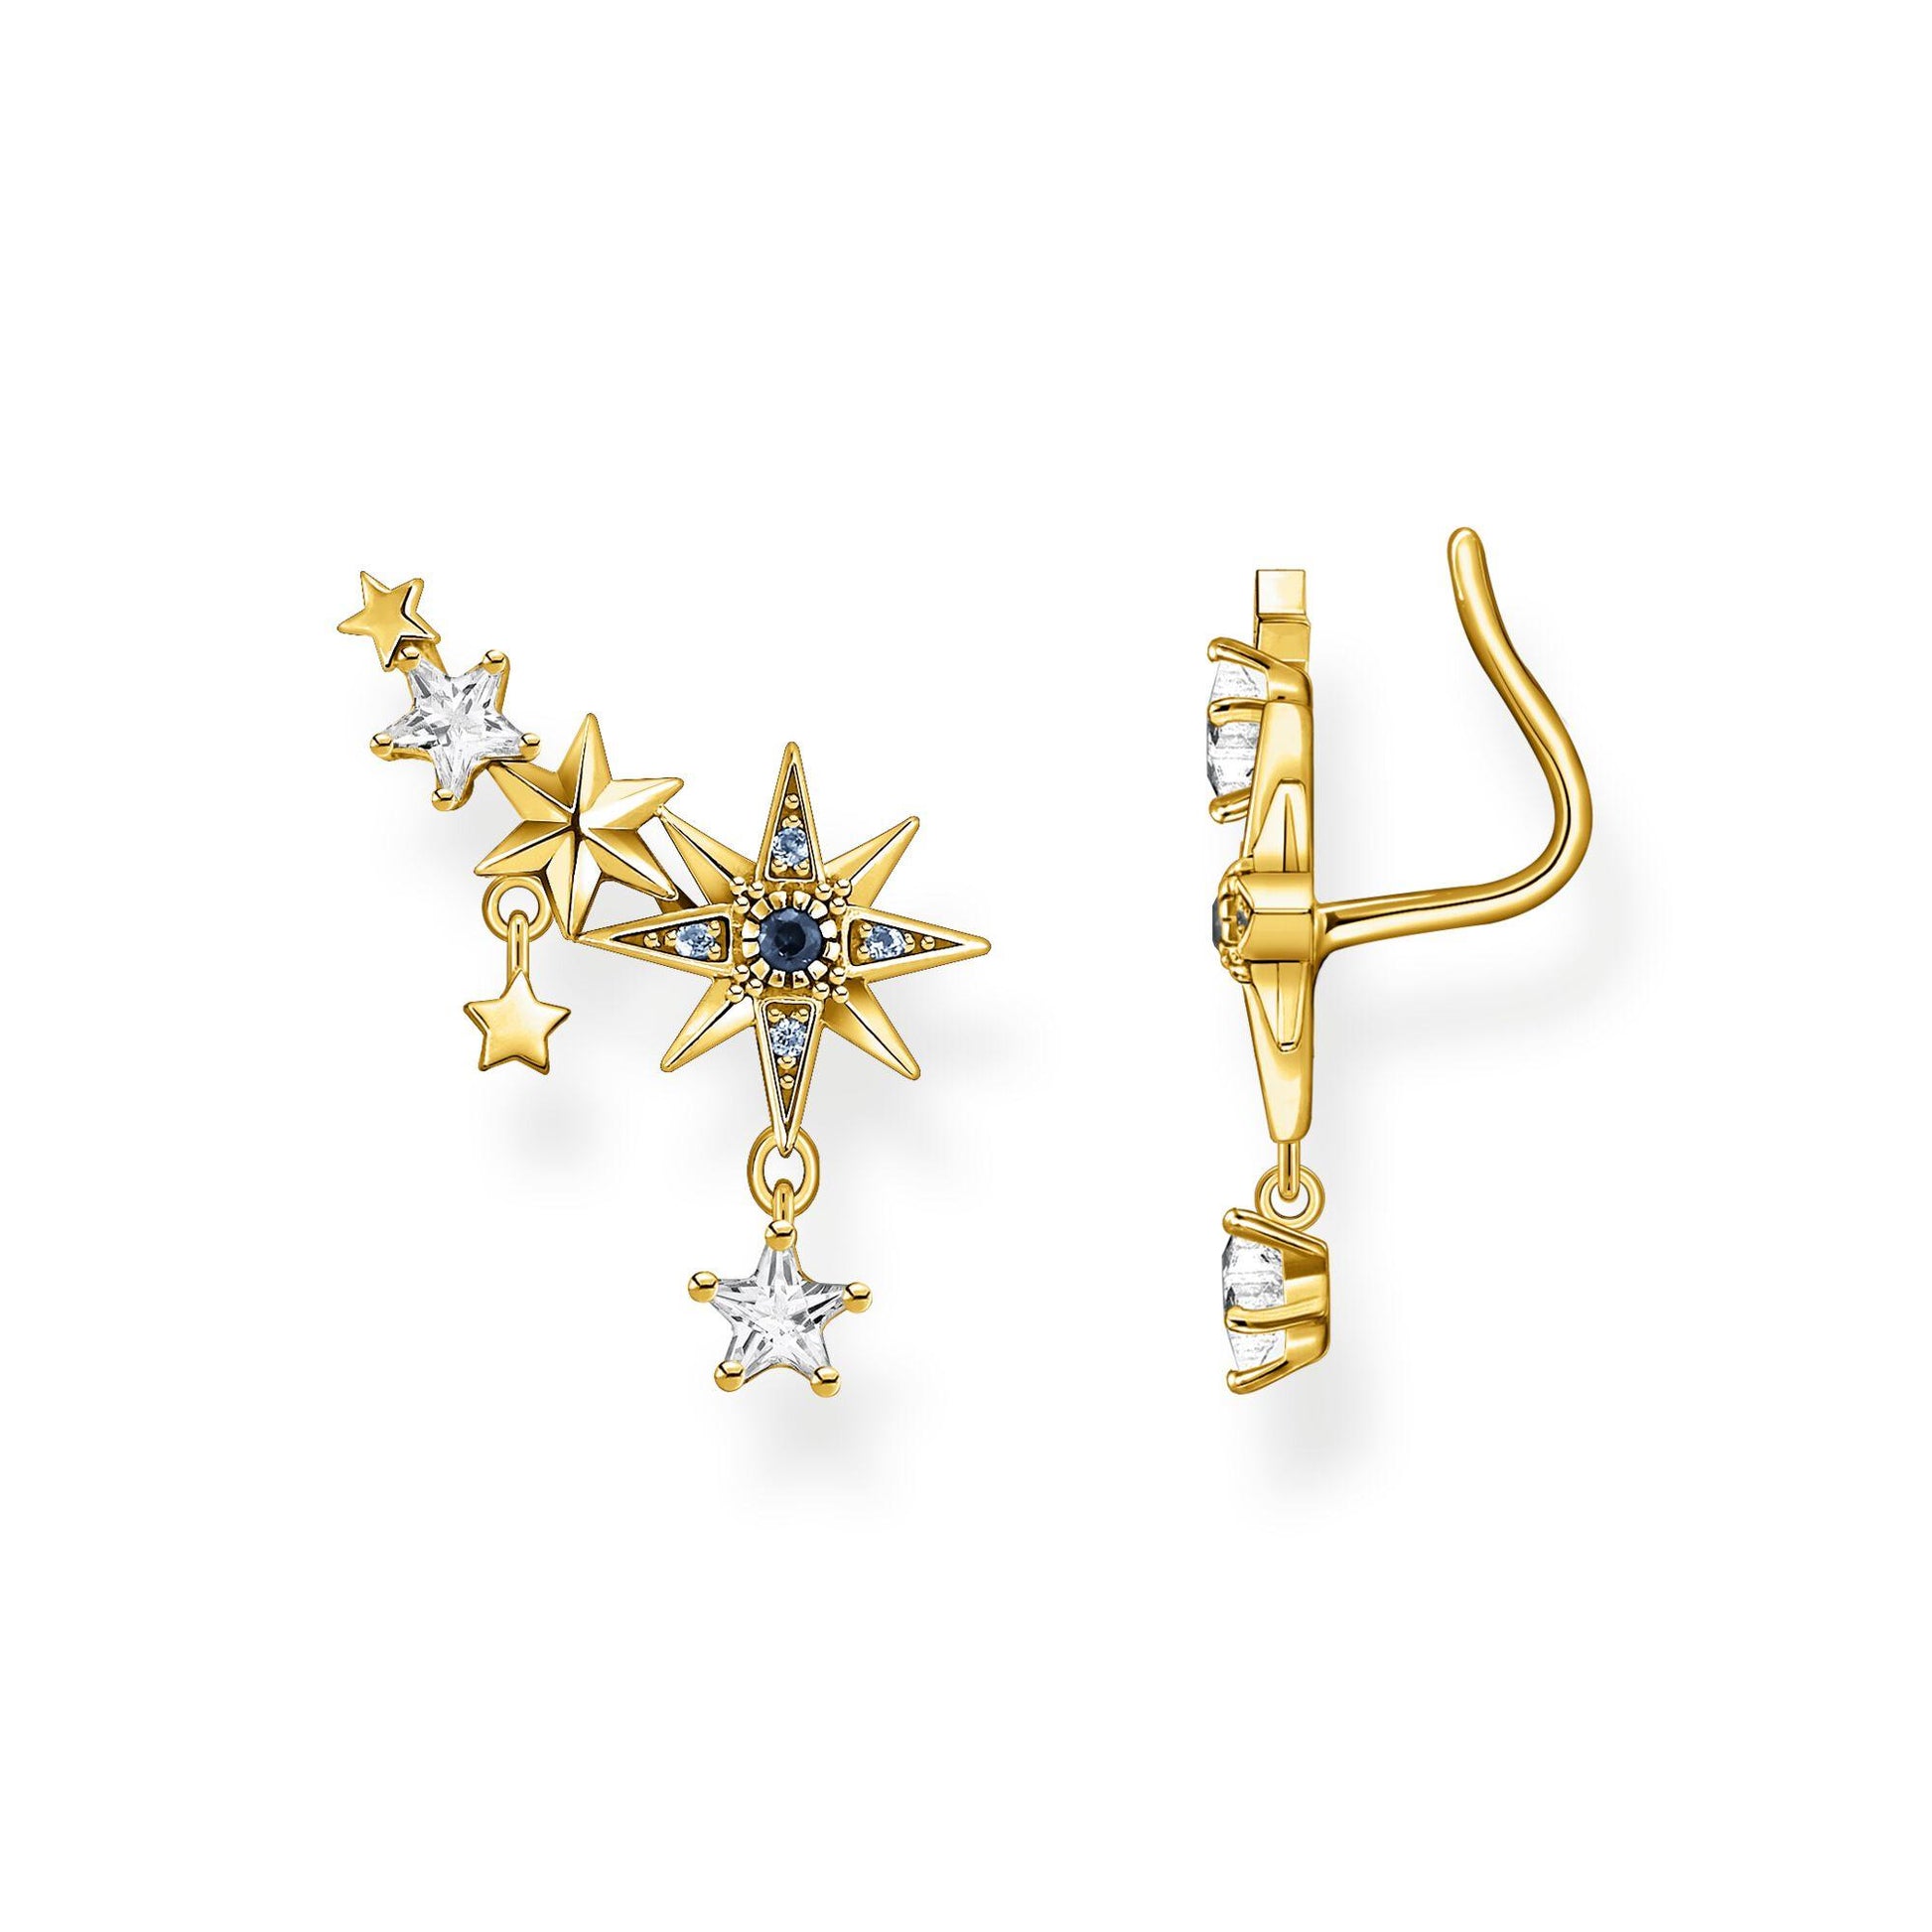 Thomas Sabo Yellow Gold Plated Multi Coloured Stone Star Ear Climbers H2223-959-7 - Judith Hart Jewellers